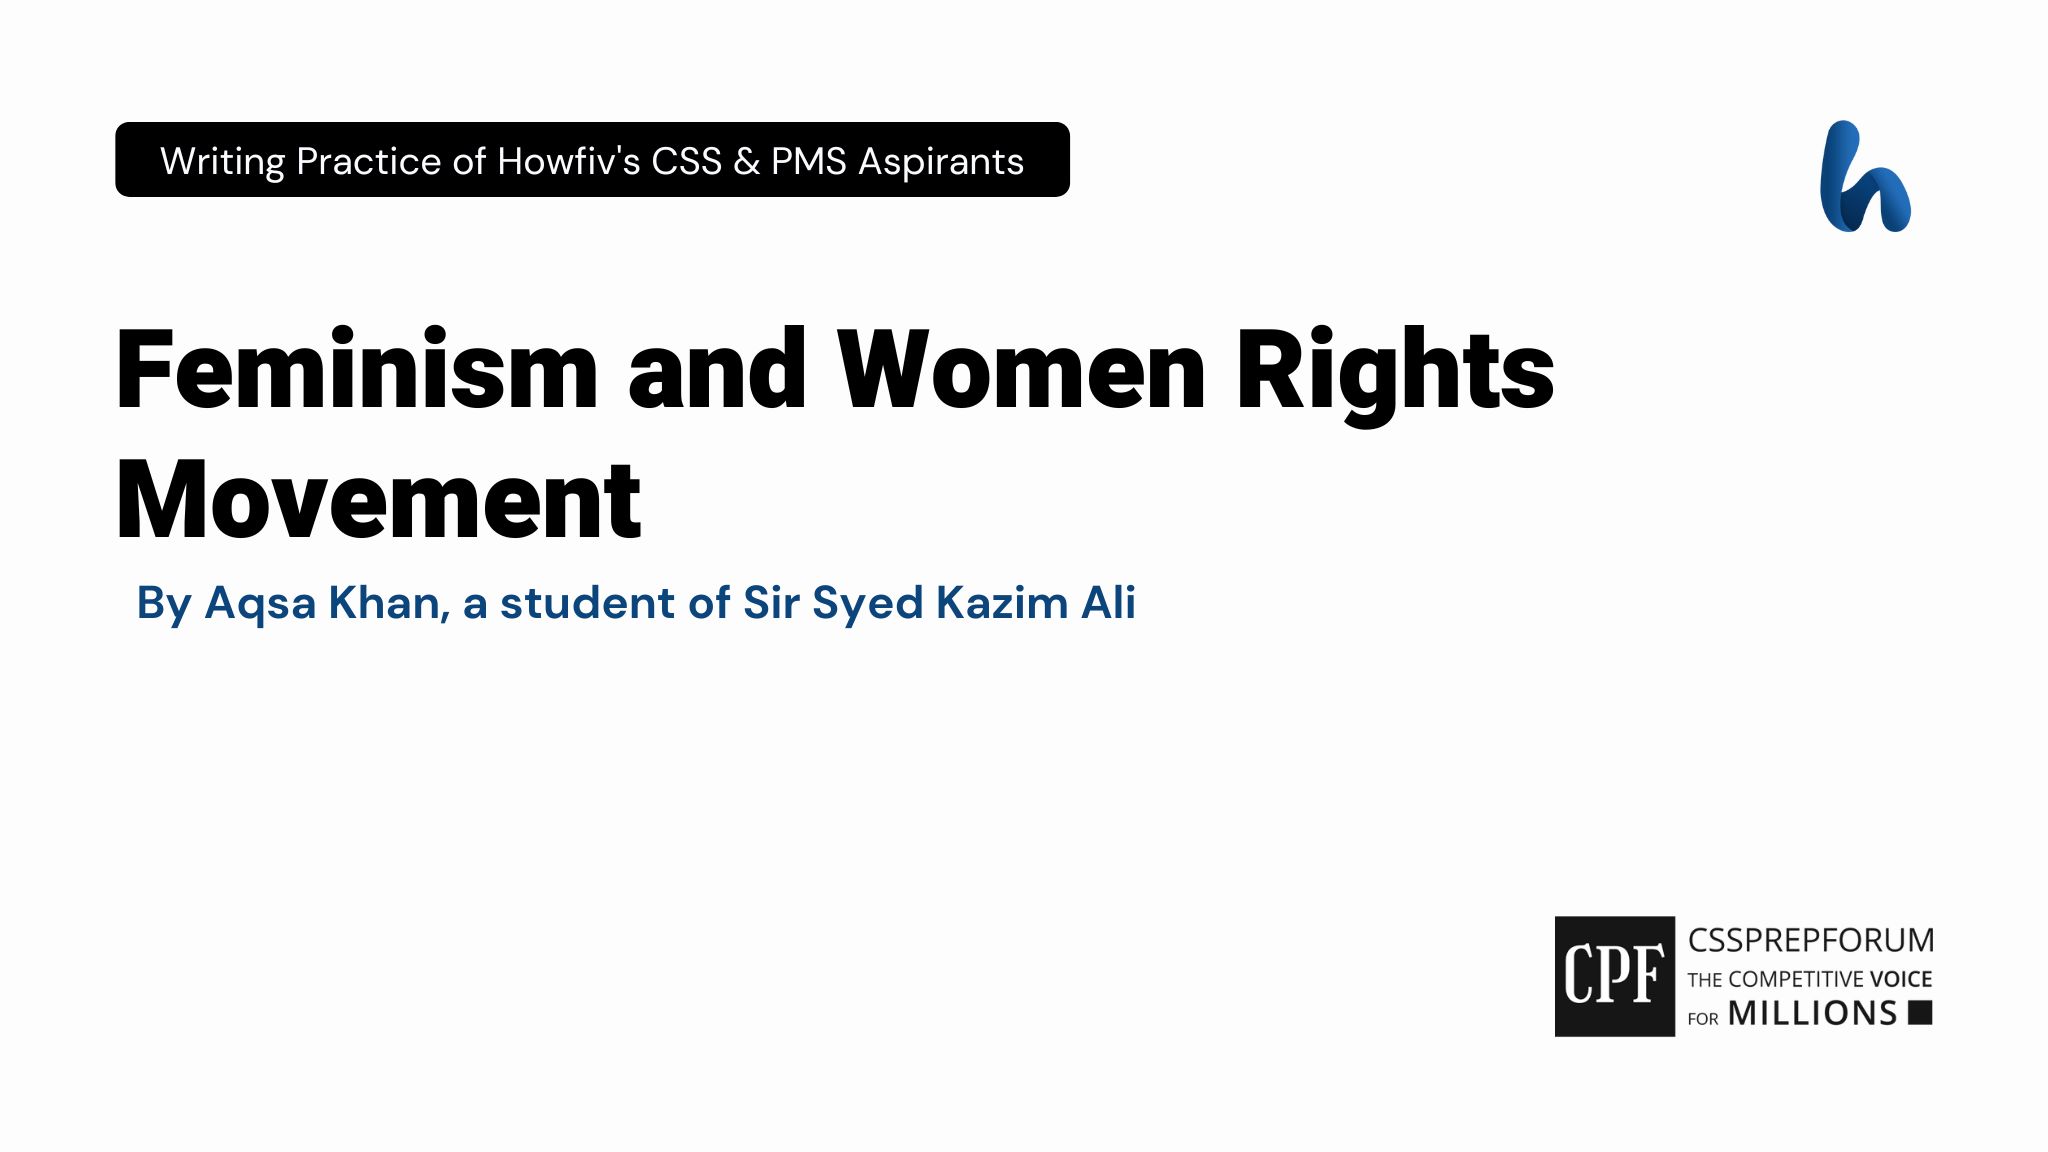 Feminism and Women Rights Movement